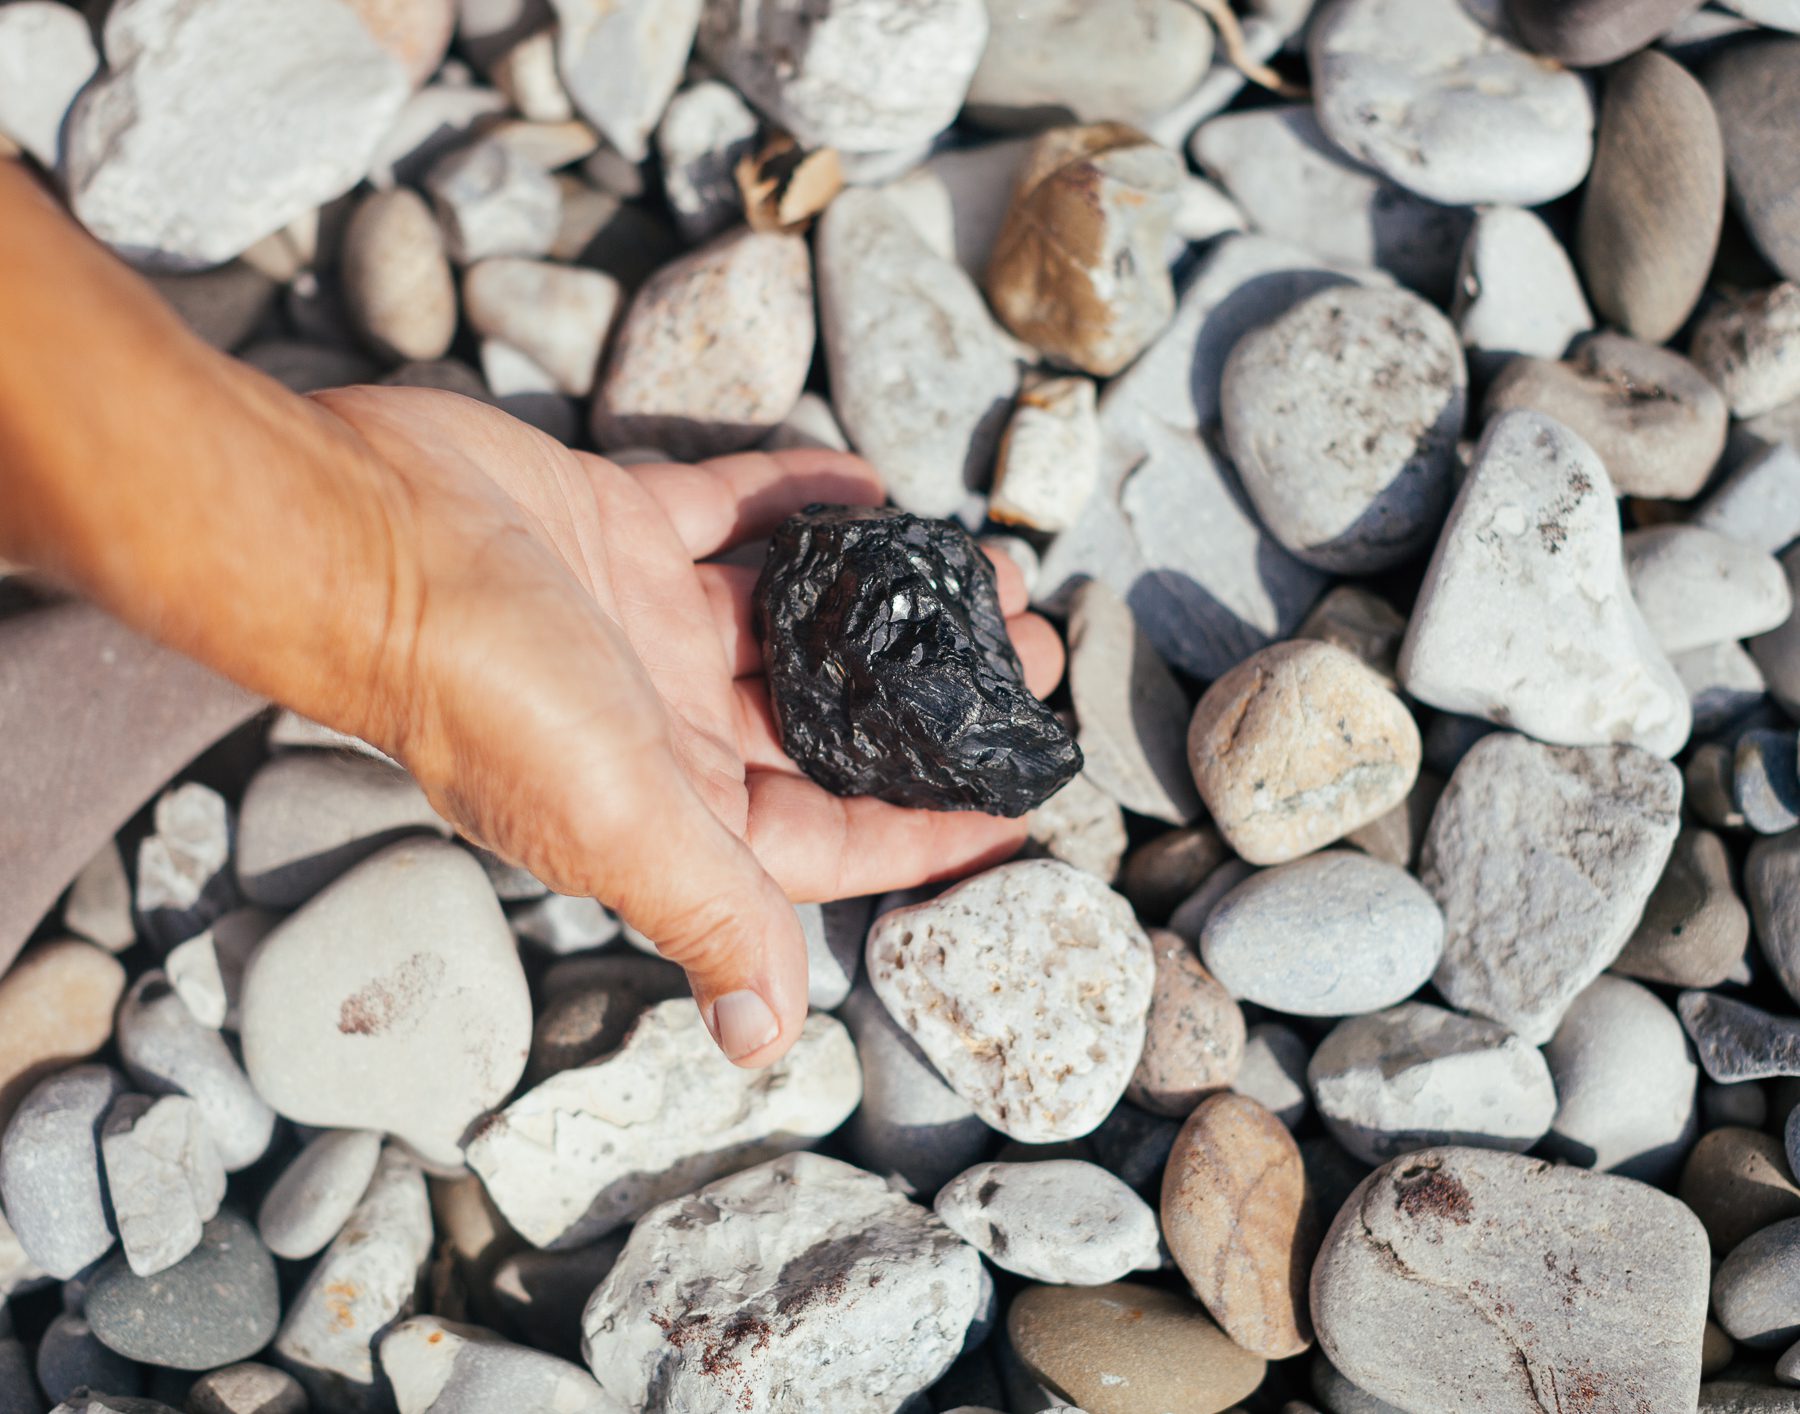 John studied Geology in the 70s and is proud of his collection of rocks and fossils. He has found many chunks of coal while walking along the shores of Lake Erie. John figures the coal was either cargo on ships going from Buffalo to Detroit or fuel on old coal-fired ships.